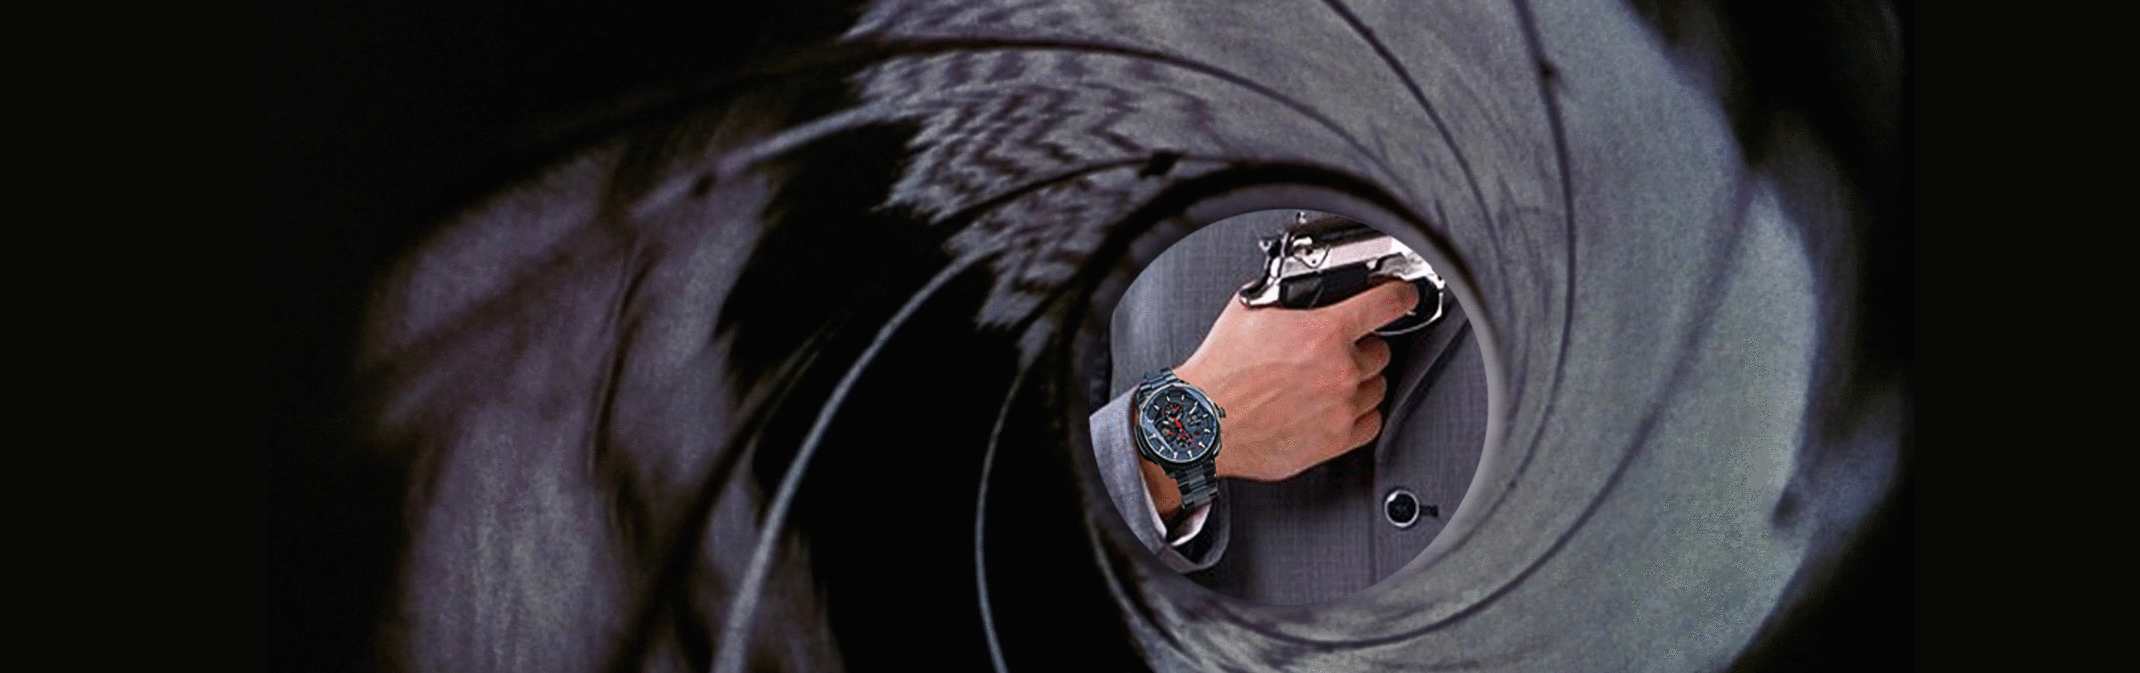 10 Watches Bond Would Rock